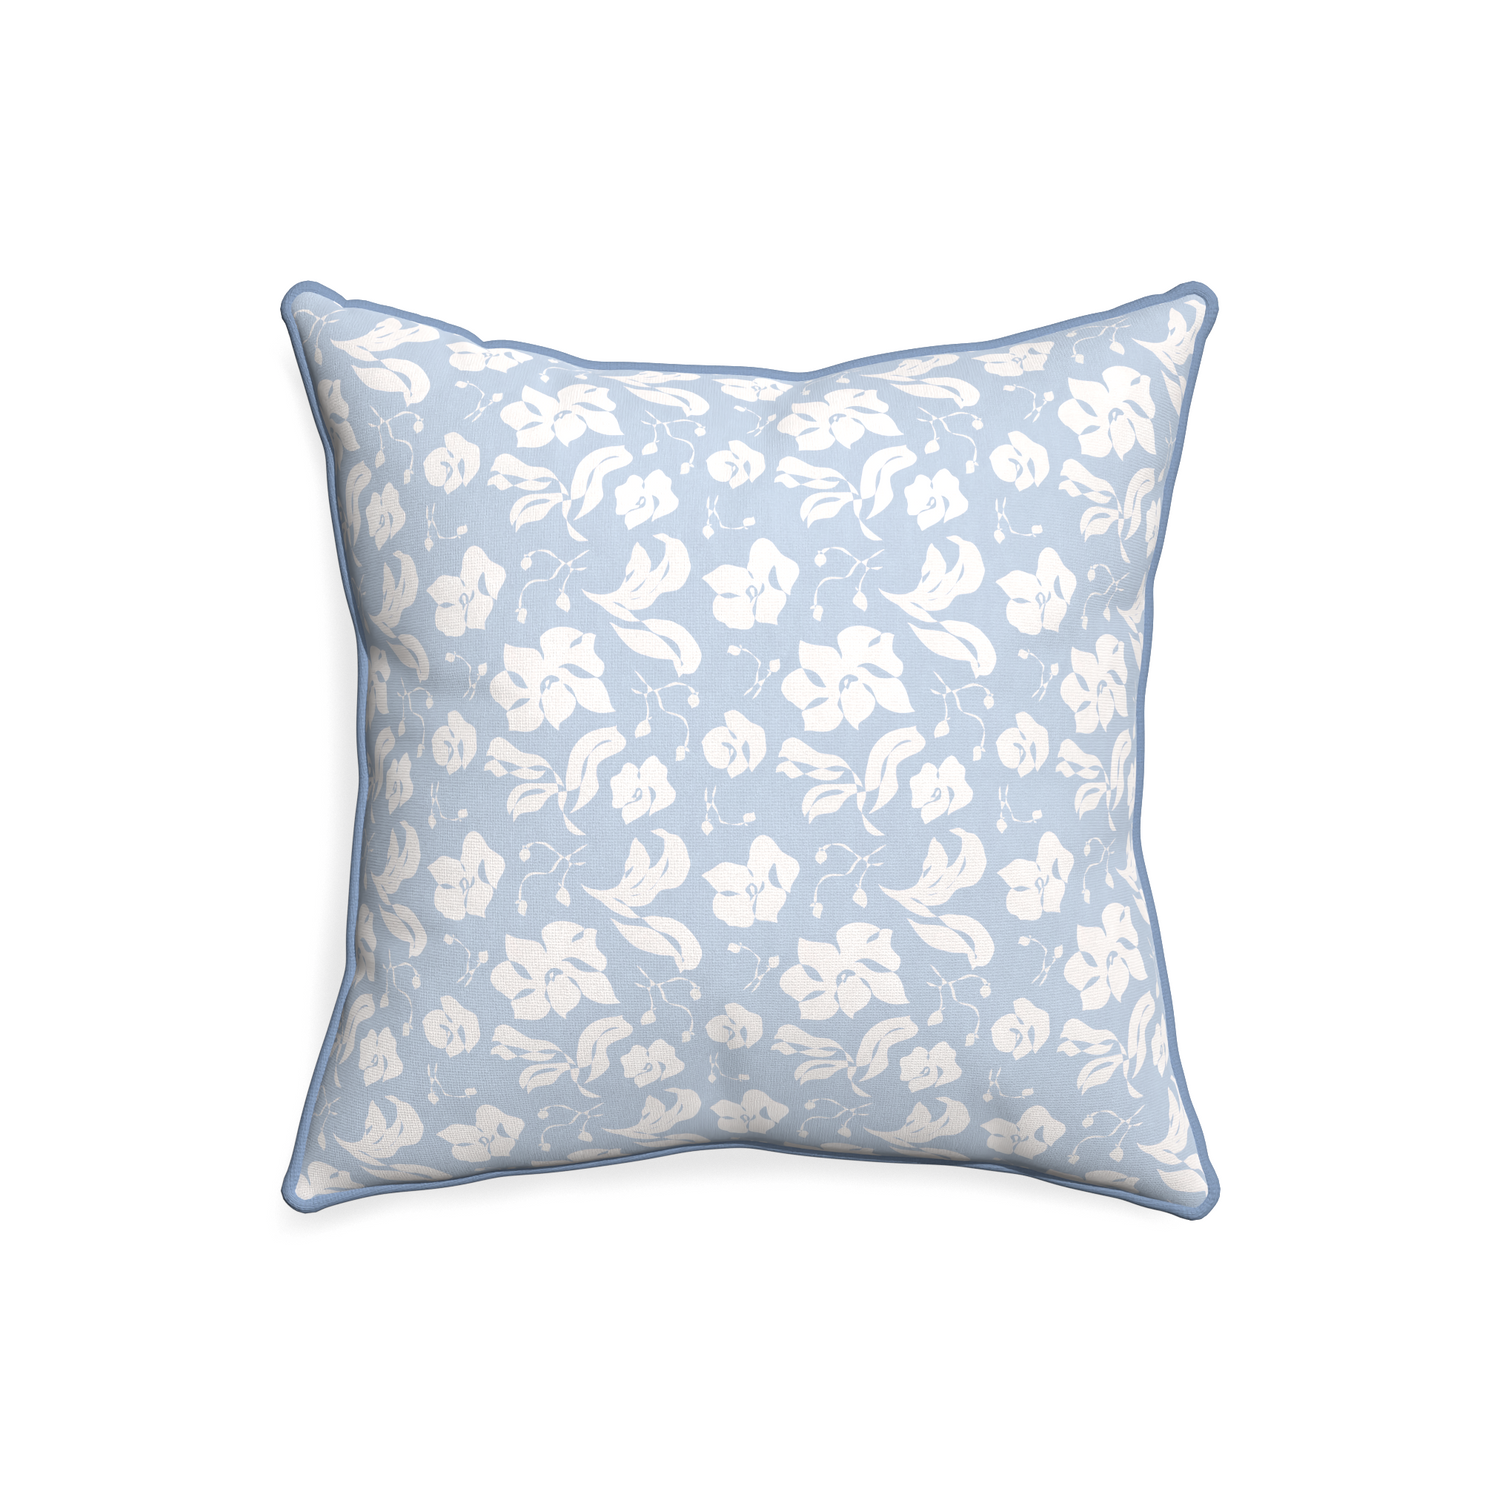 20-square georgia custom pillow with sky piping on white background